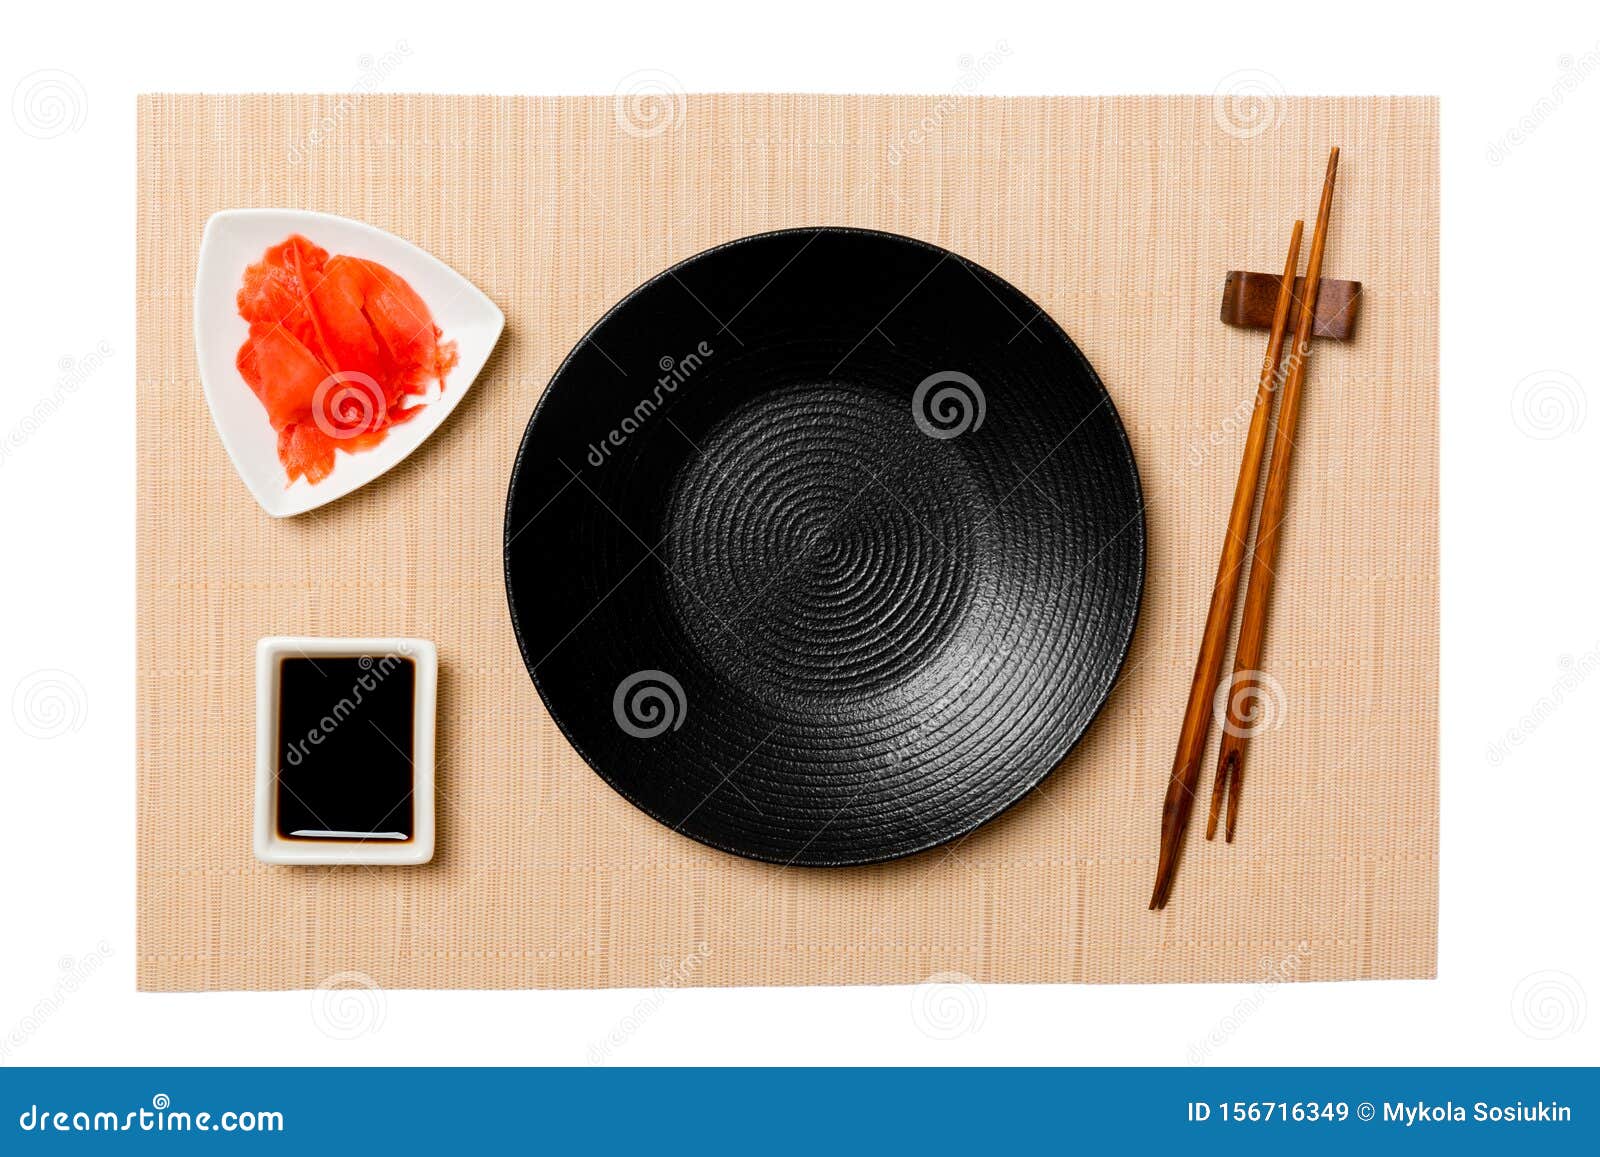 https://thumbs.dreamstime.com/z/empty-round-black-plate-chopsticks-sushi-ginger-soy-sauce-brown-mat-background-top-view-copy-space-you-design-156716349.jpg